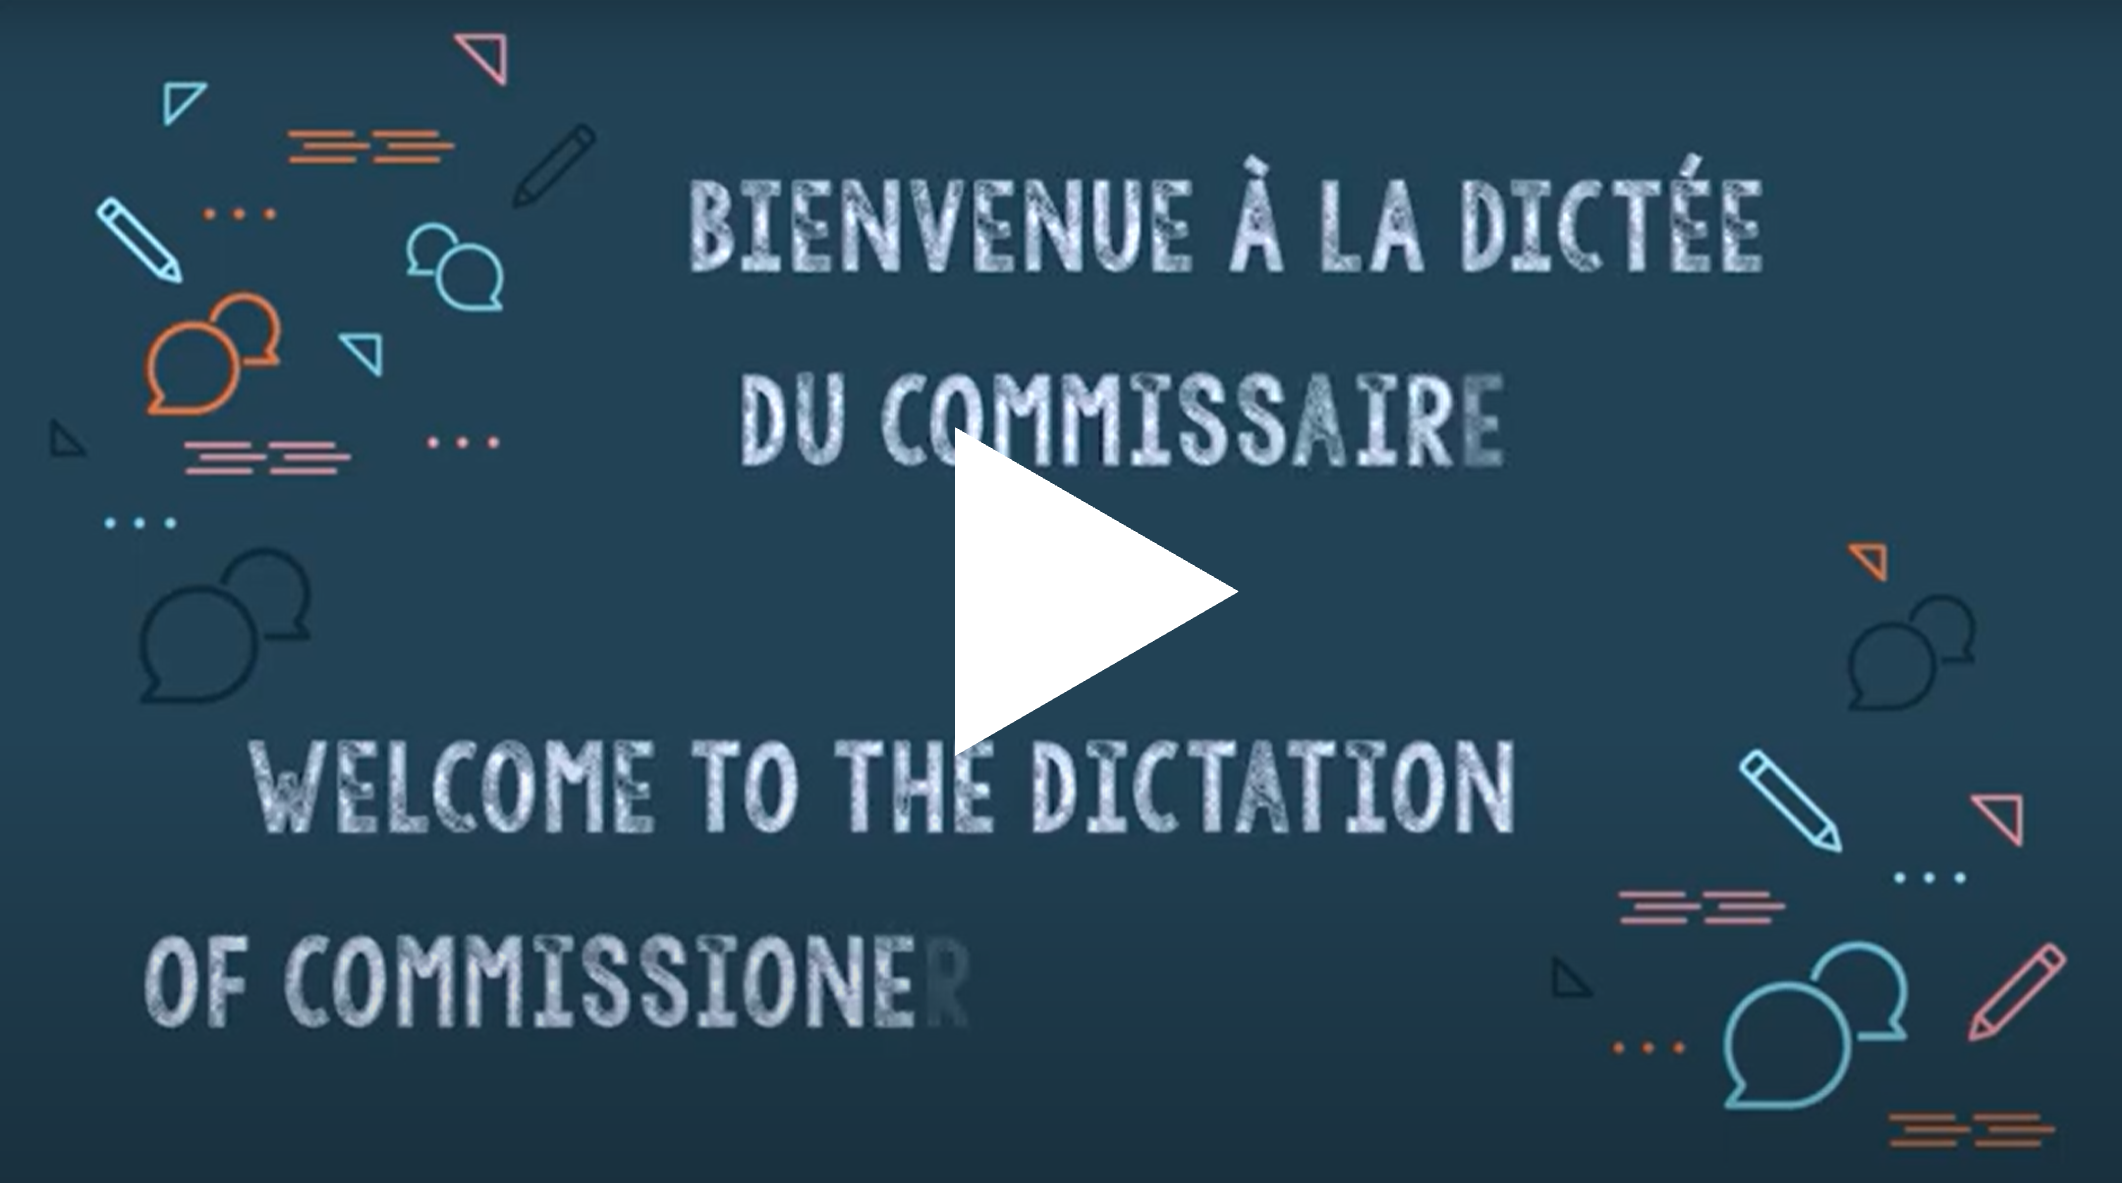 Welcome to the Commissioner's dictation